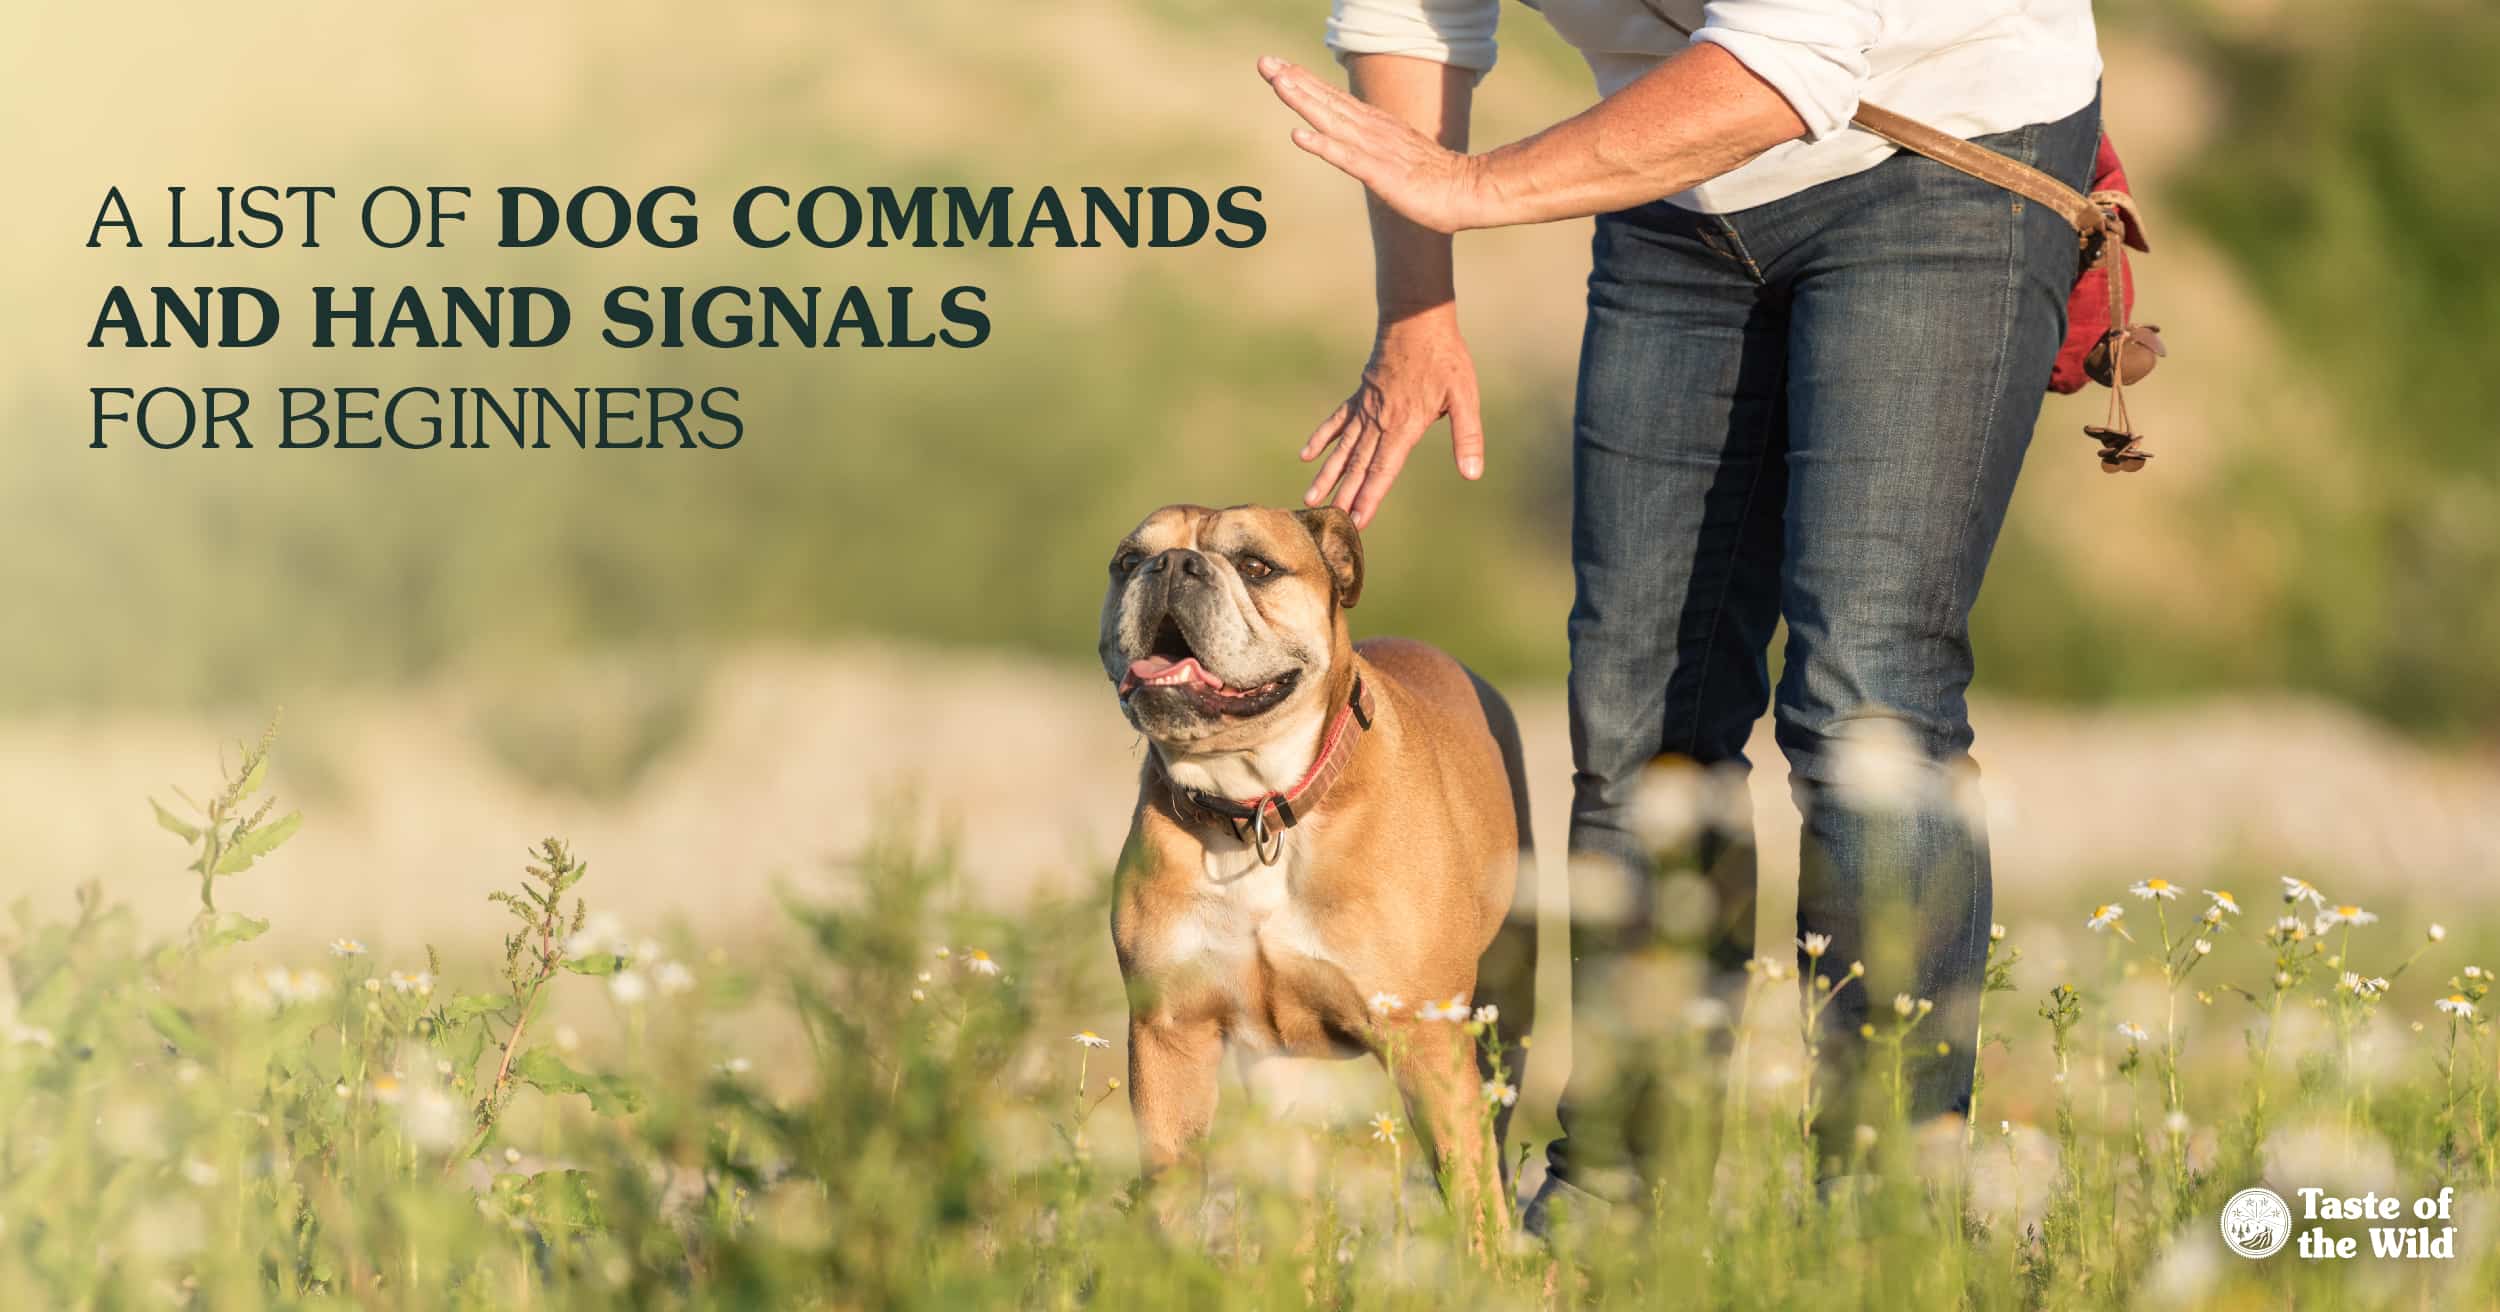 A dog standing next to its owner in a field while the owner uses a hand signal to command the dog to stay.